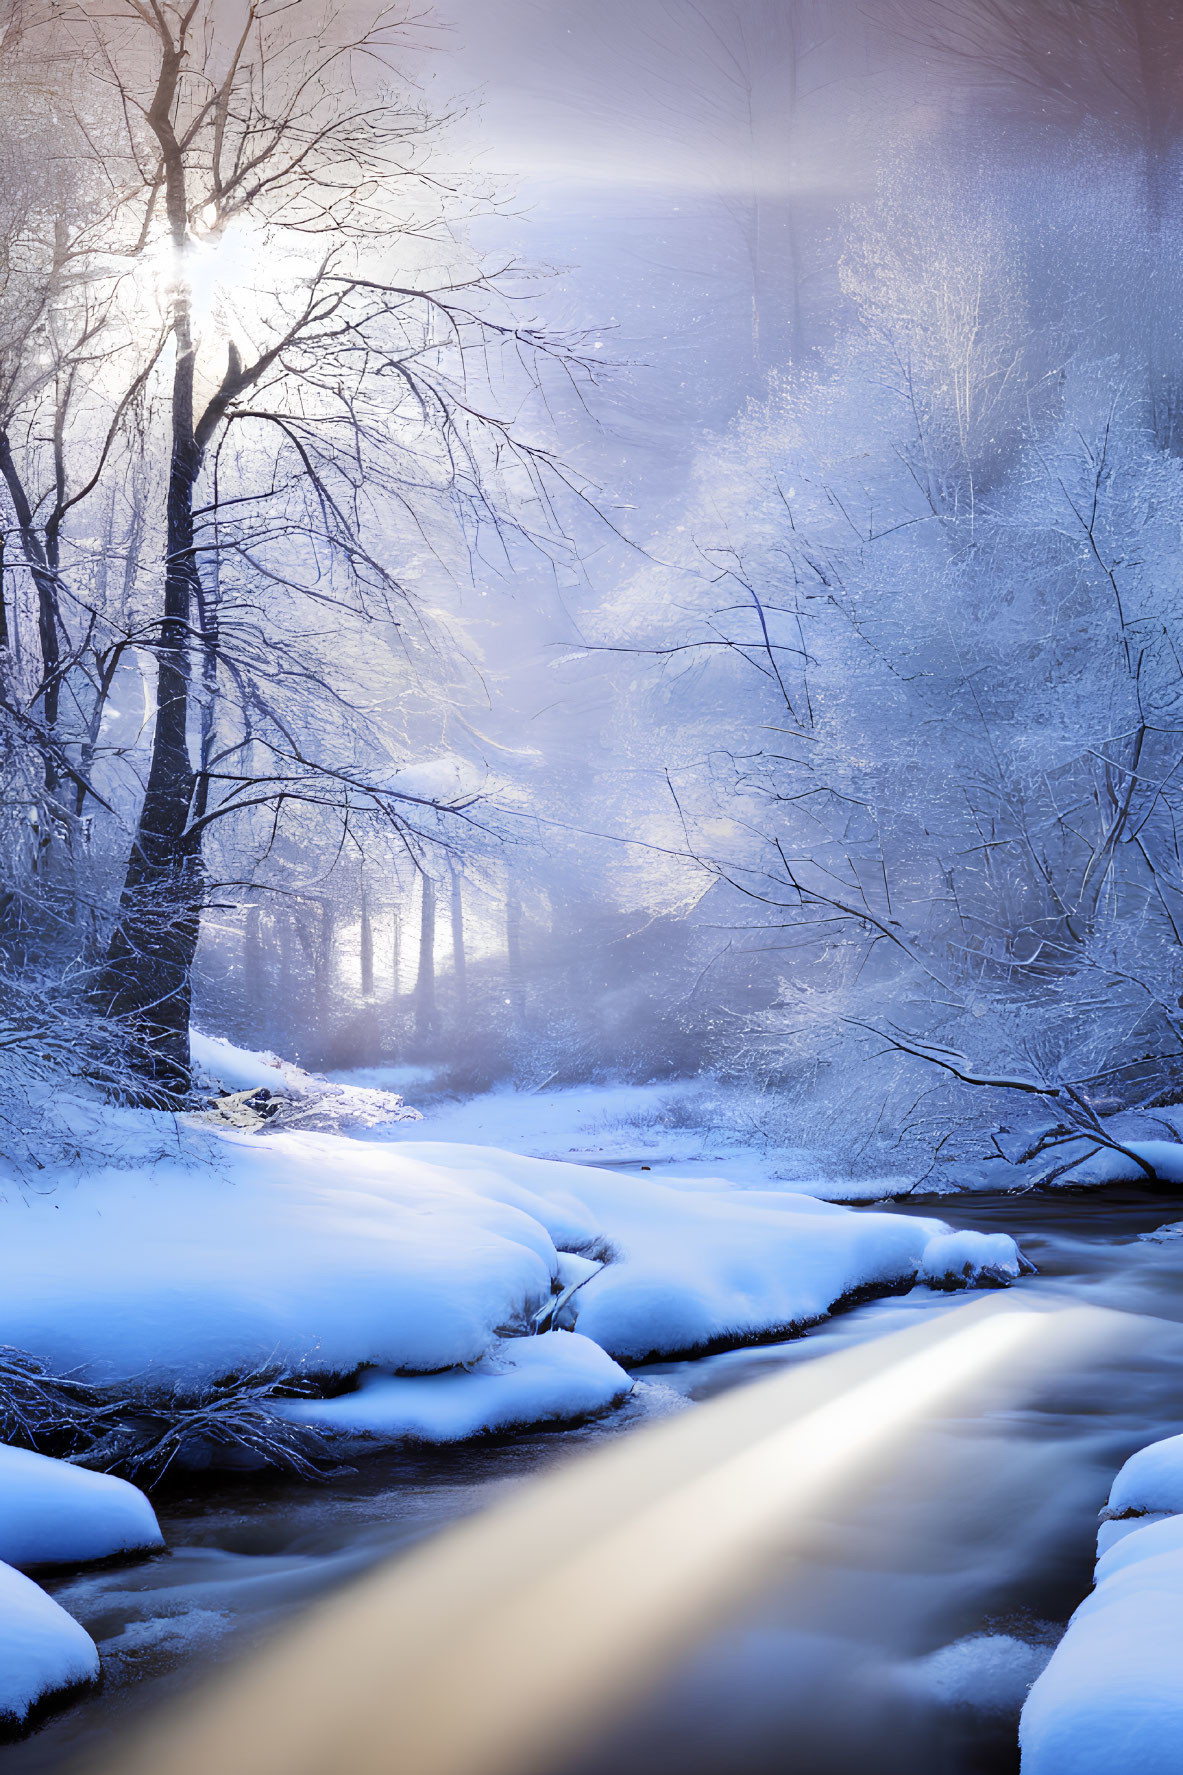 Snowy Landscape with Stream and Sunlit Misty Trees